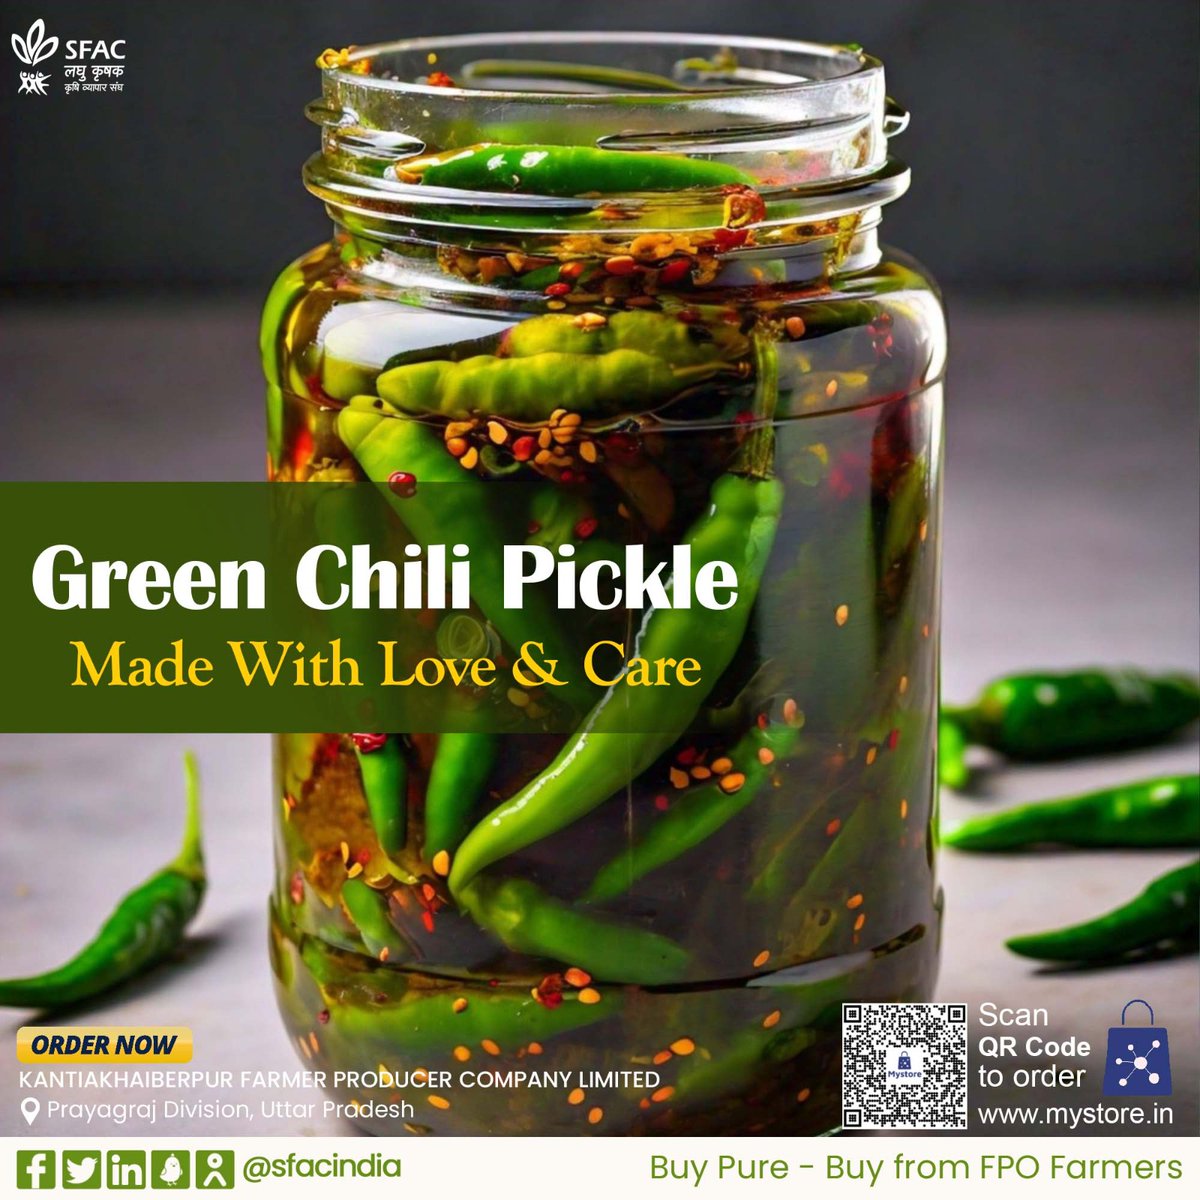 This delicious pickle contains fresh green chilis, pure mustard oil, black salt, etc. Enjoy it with dal, roti & other dishes for an enhanced taste.

Buy from FPO farmers at👇

mystore.in/en/product/gre…

😋

@AgriGoI @CMOfficeUP @ONDC_Official @PIB_India @mygovindia #VocalForLocal